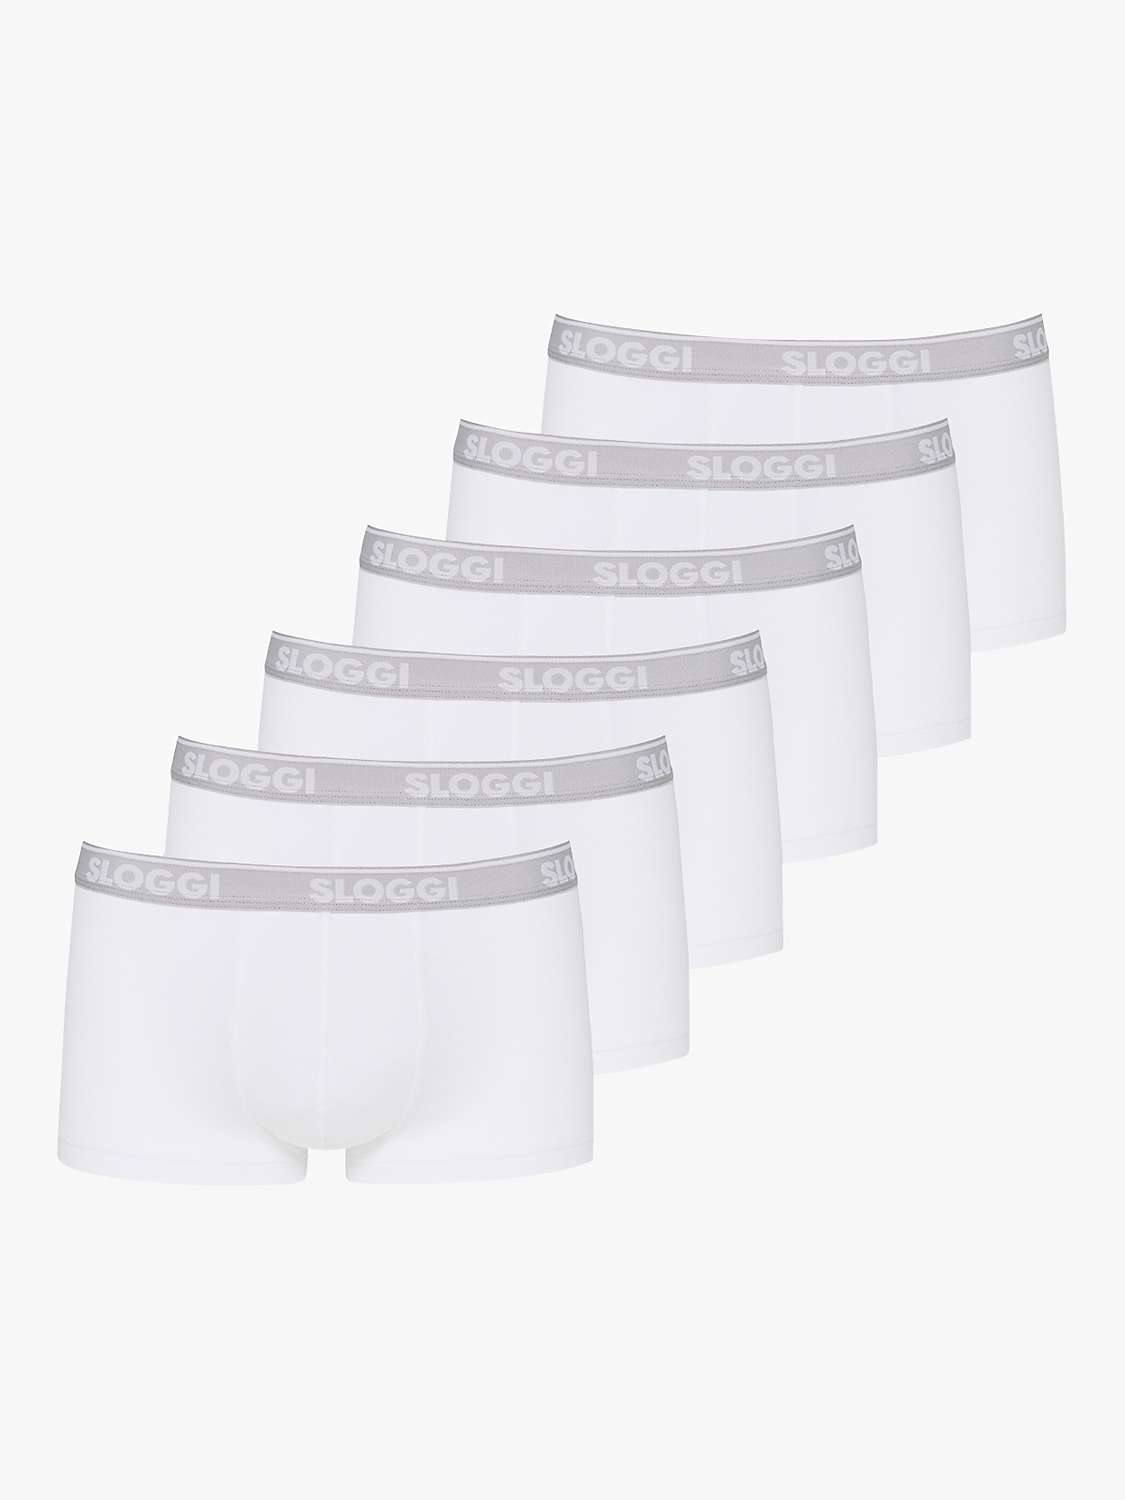 Buy sloggi GO ABC Cotton Stretch Hipster Trunks, Pack of 6 Online at johnlewis.com